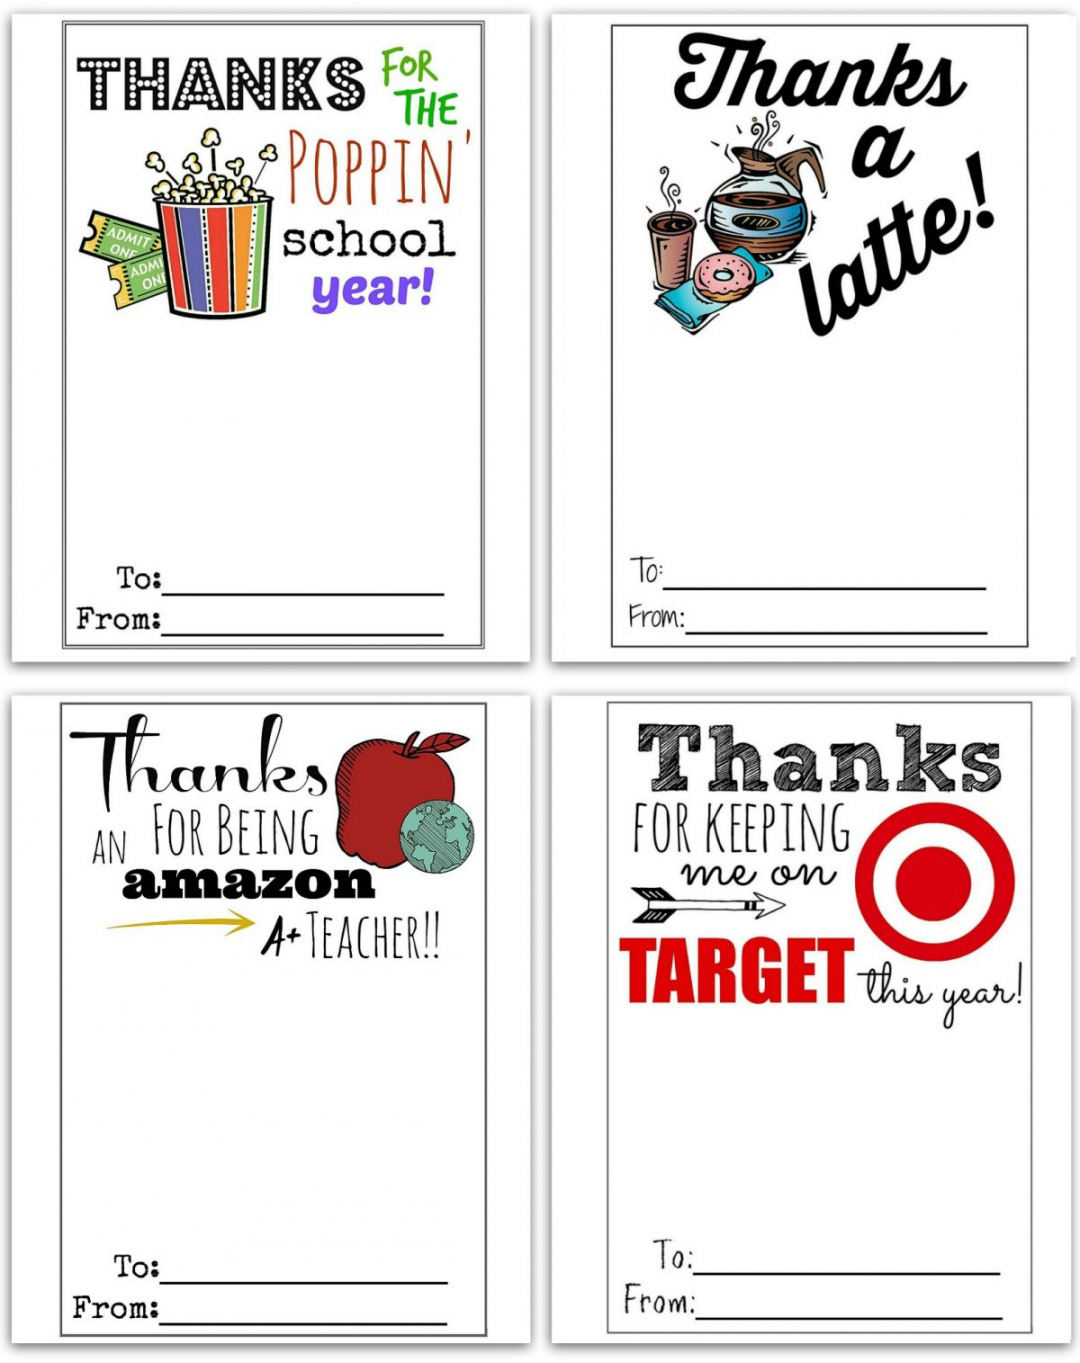 Free Teacher Appreciation Printable Cards - Printable - FREE Printable Gift Card Holders for Teacher Gifts